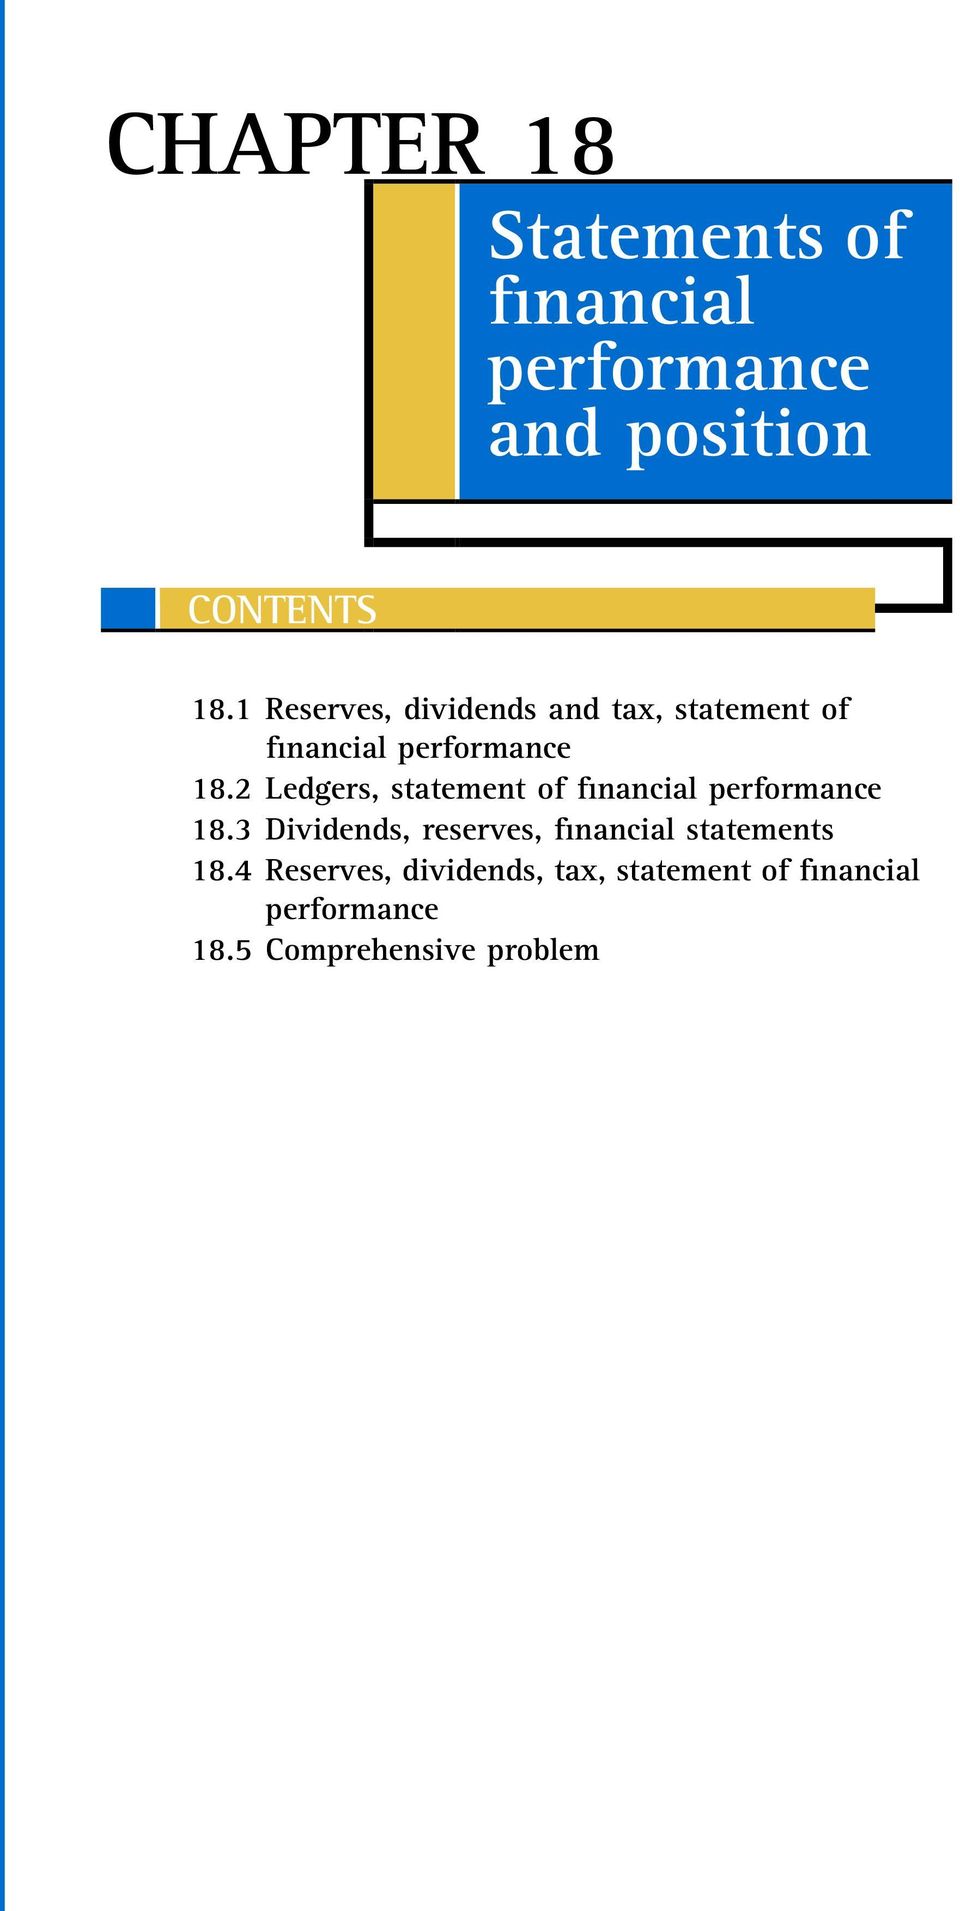 2 Ledgers, statement of financial performance 18.